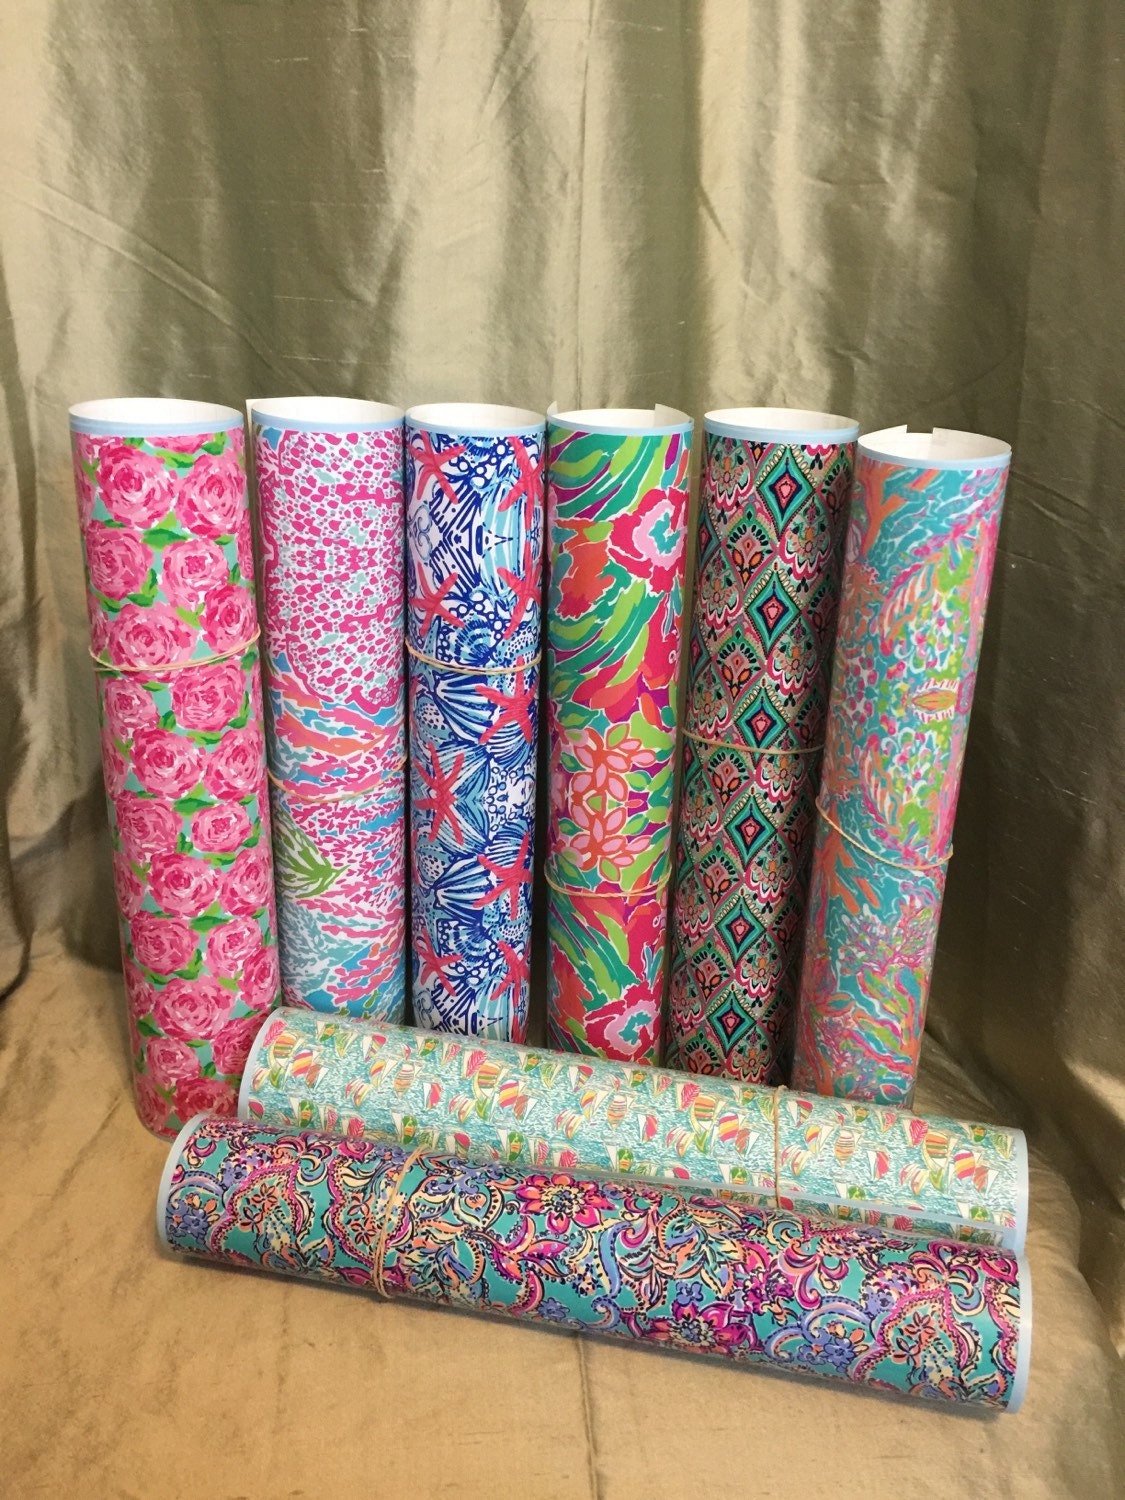 Download Lilly Pulitzer Vinyl Roll 36 Pattern Options 3 by ...